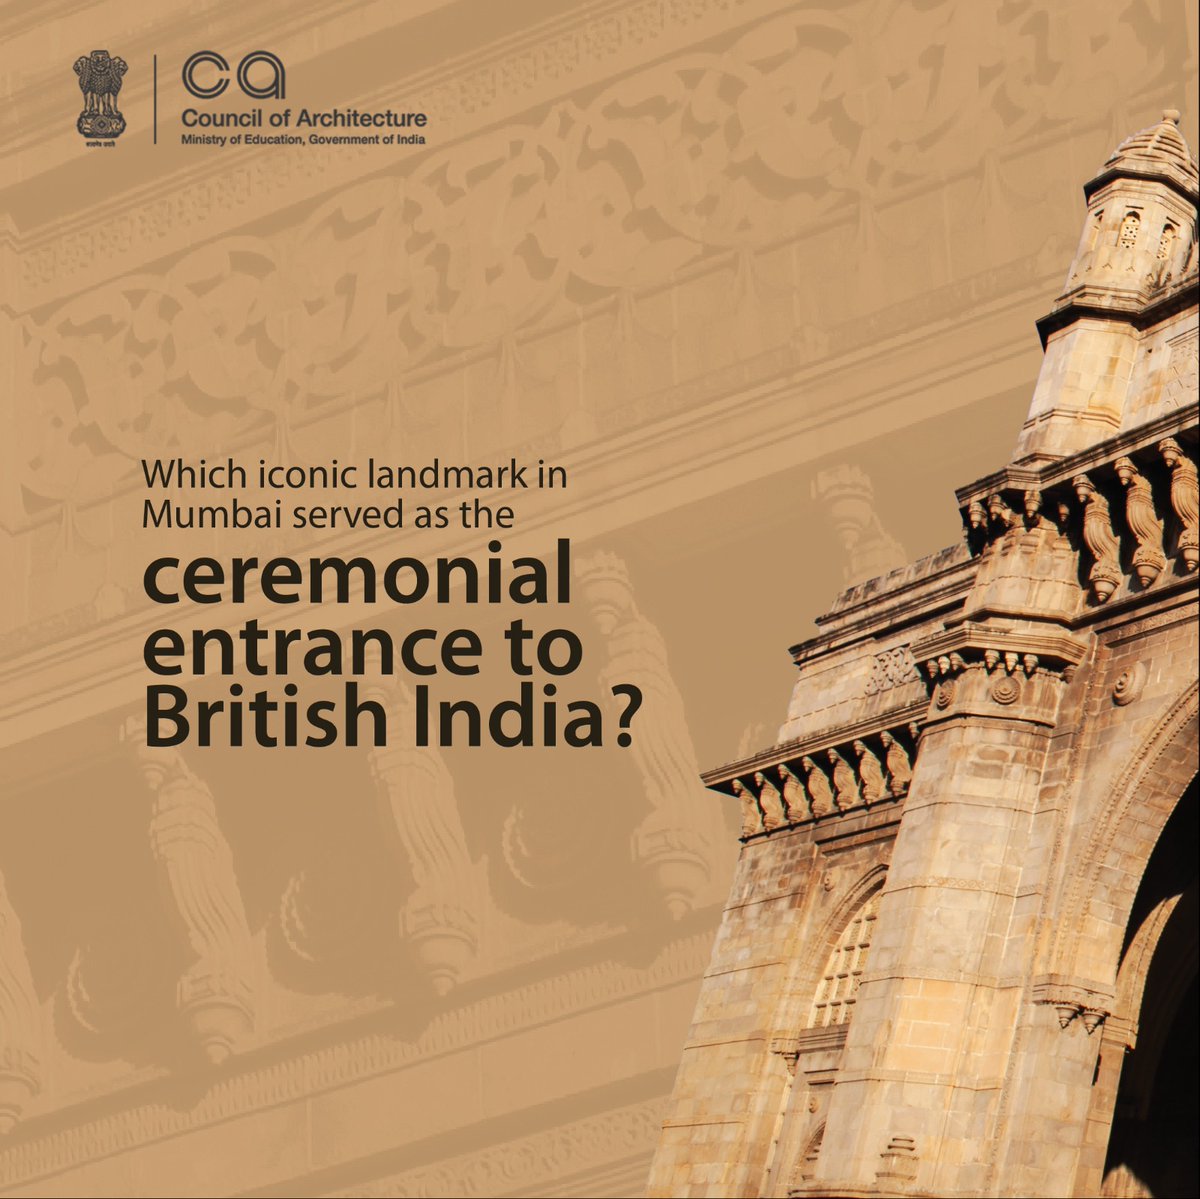 Test your knowledge of Indian history! Guess which famous landmark in Mumbai served as the ceremonial entrance to British India. 

#HistoryQuiz #IndianHistory #BritishIndia #quiztime #architecture #councilofarchitecture